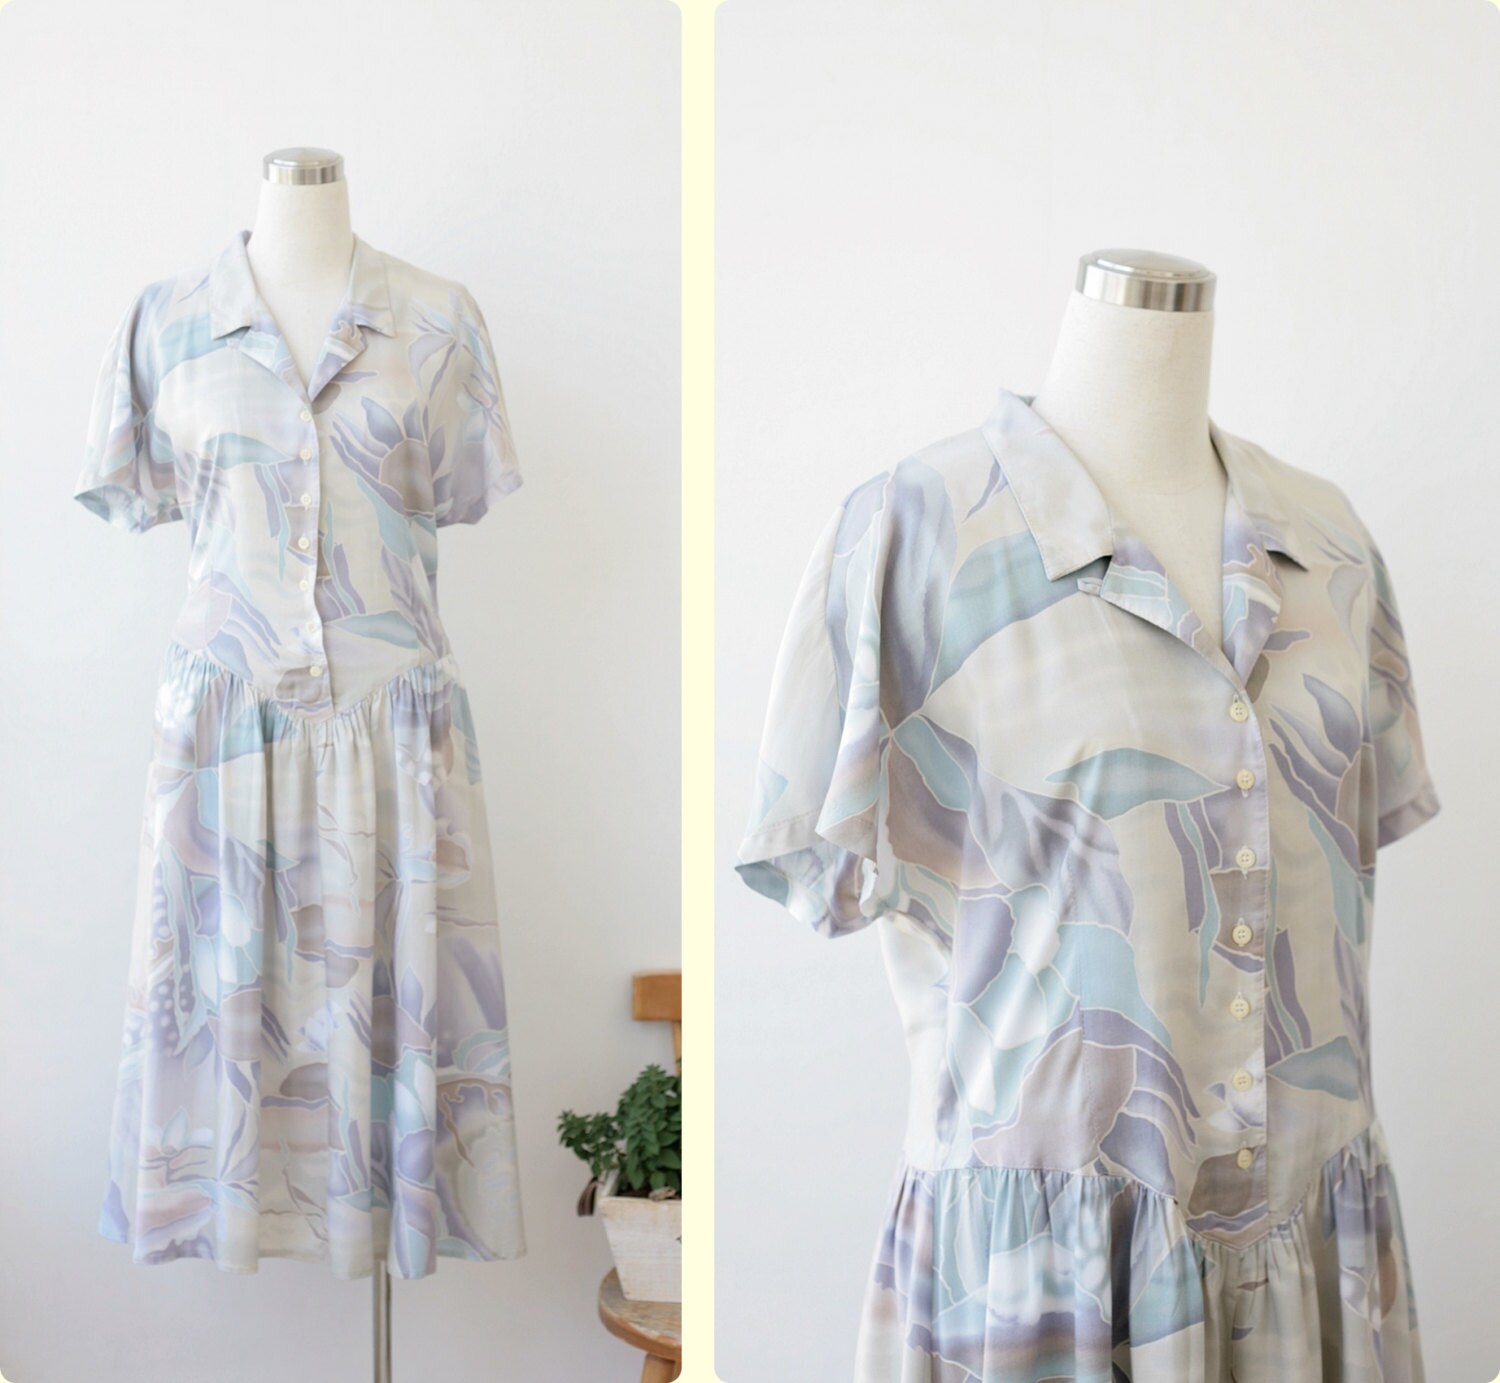 Free Shipping. 1980s vintage summer dress Large button front